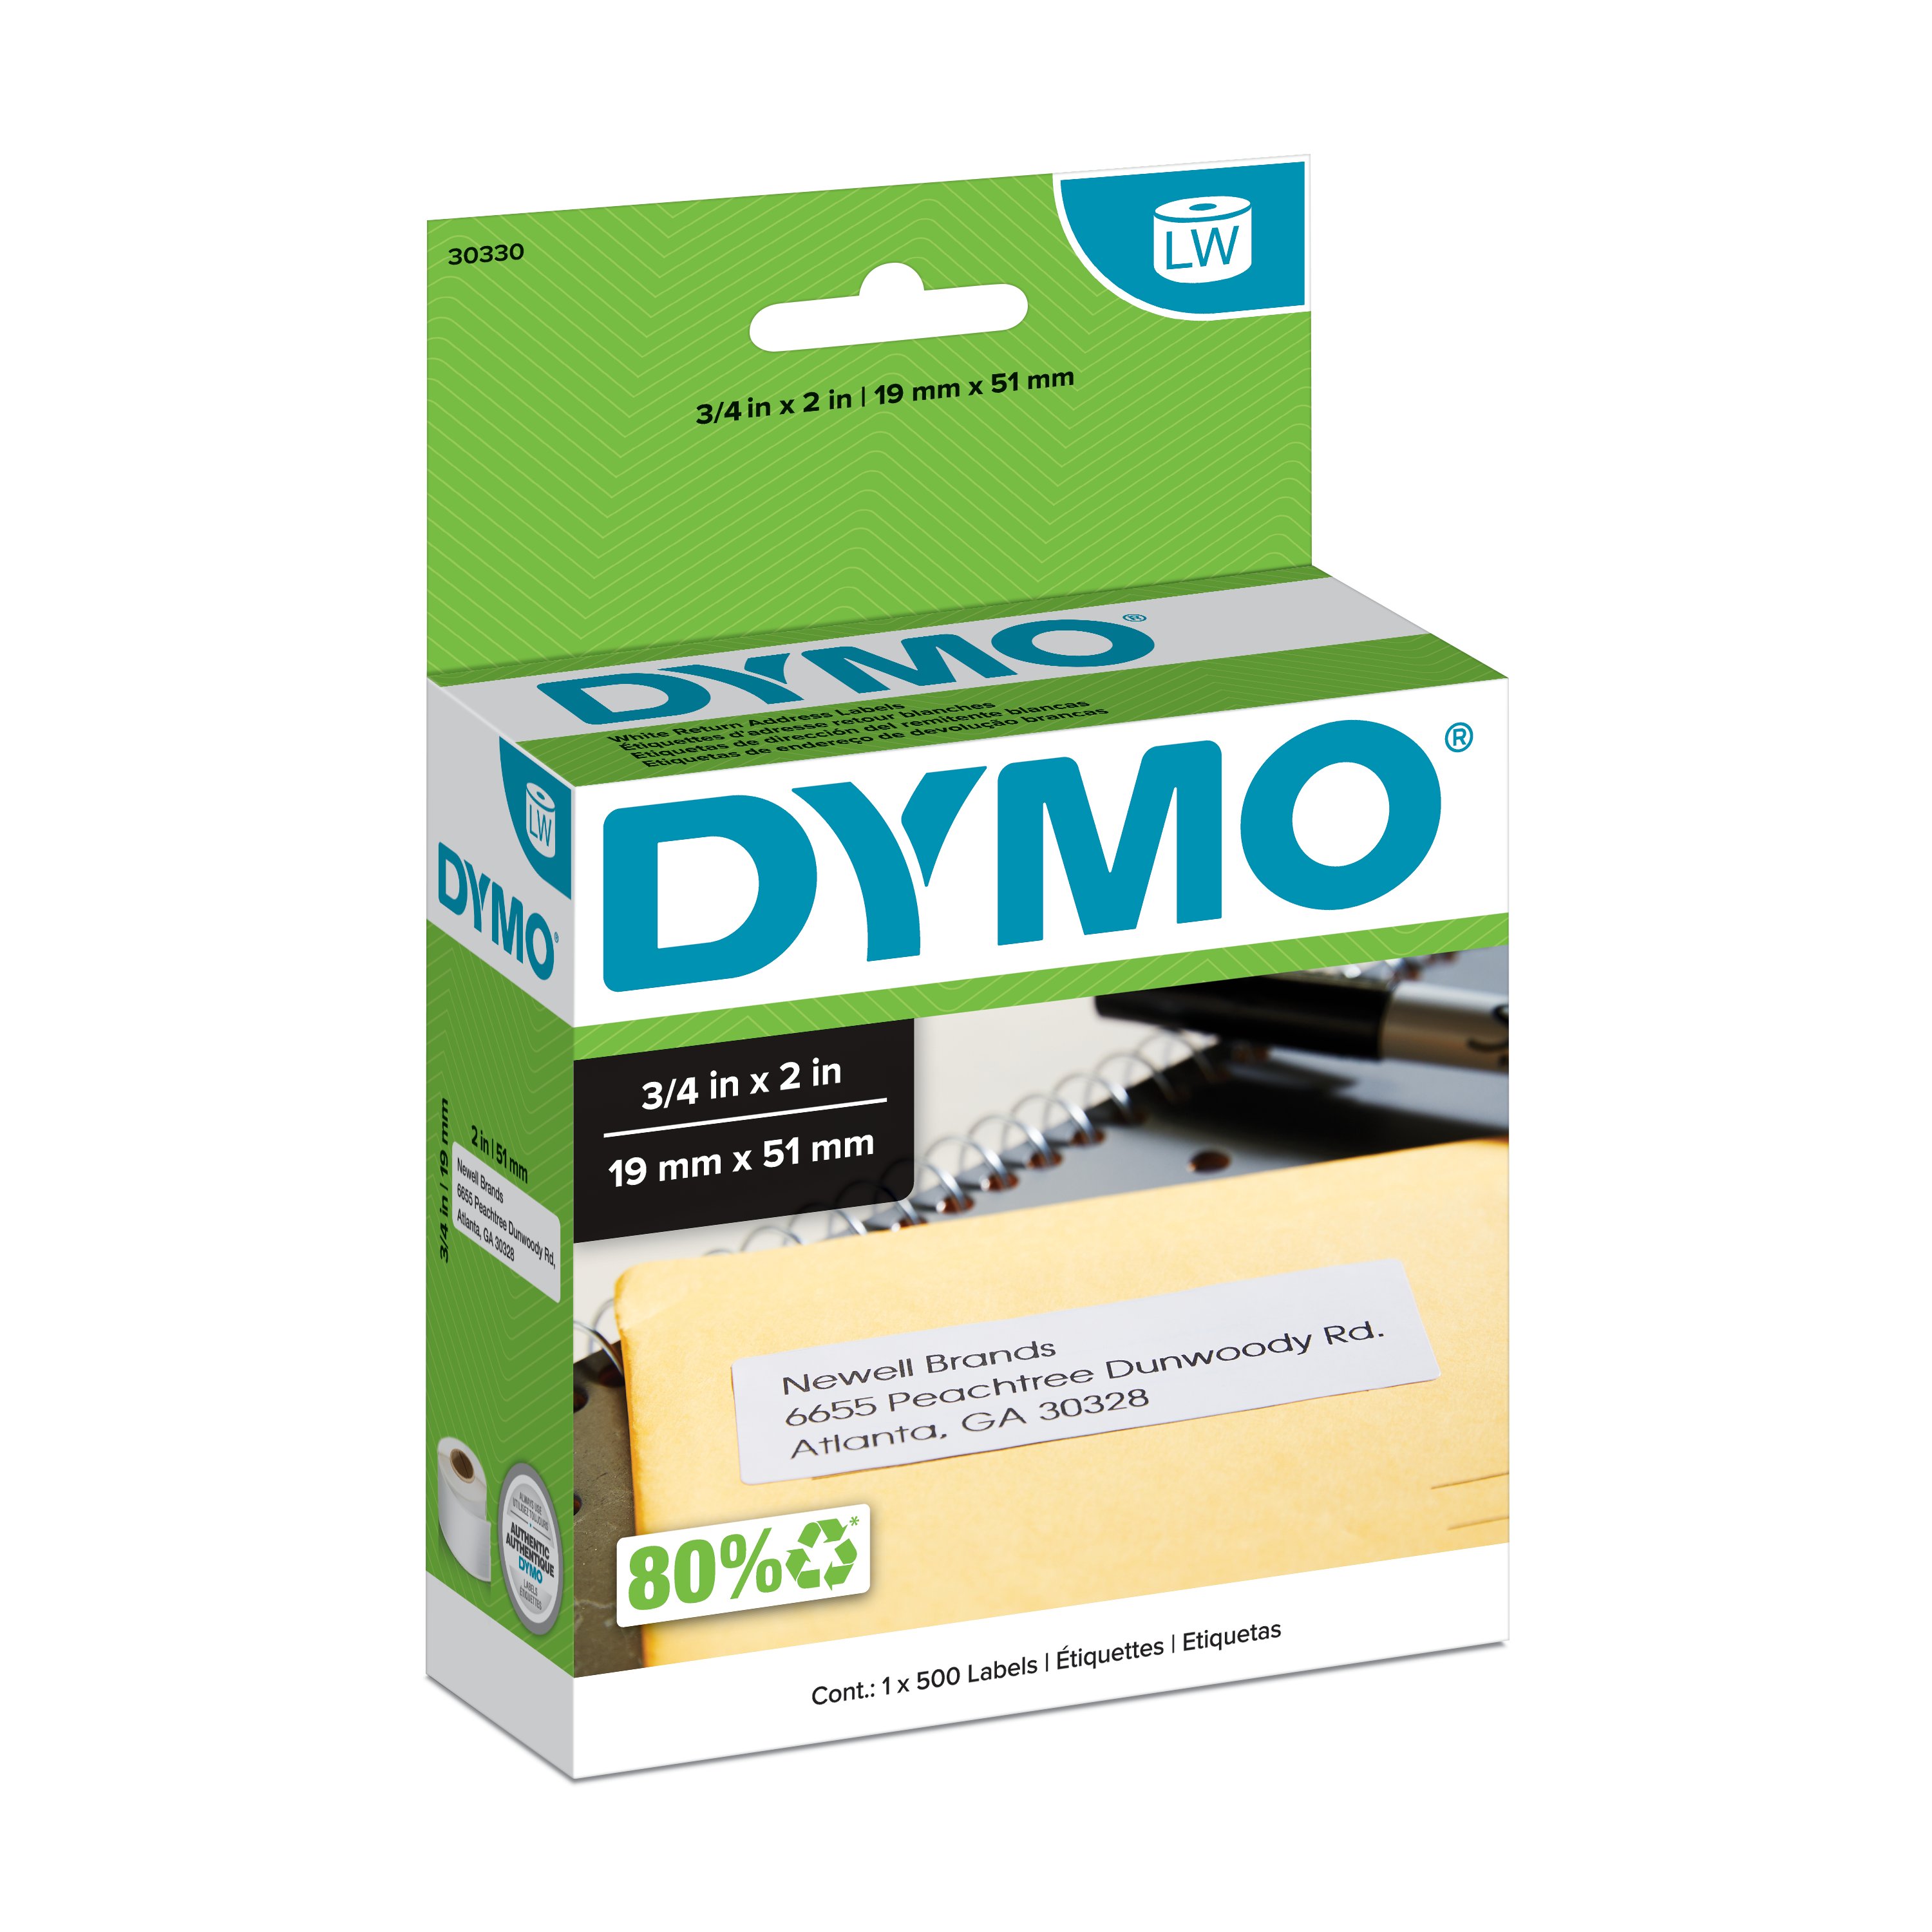 Dymo Authentic LabelWriter Return Address Labels for 6 Rolls of 500 for sale online 